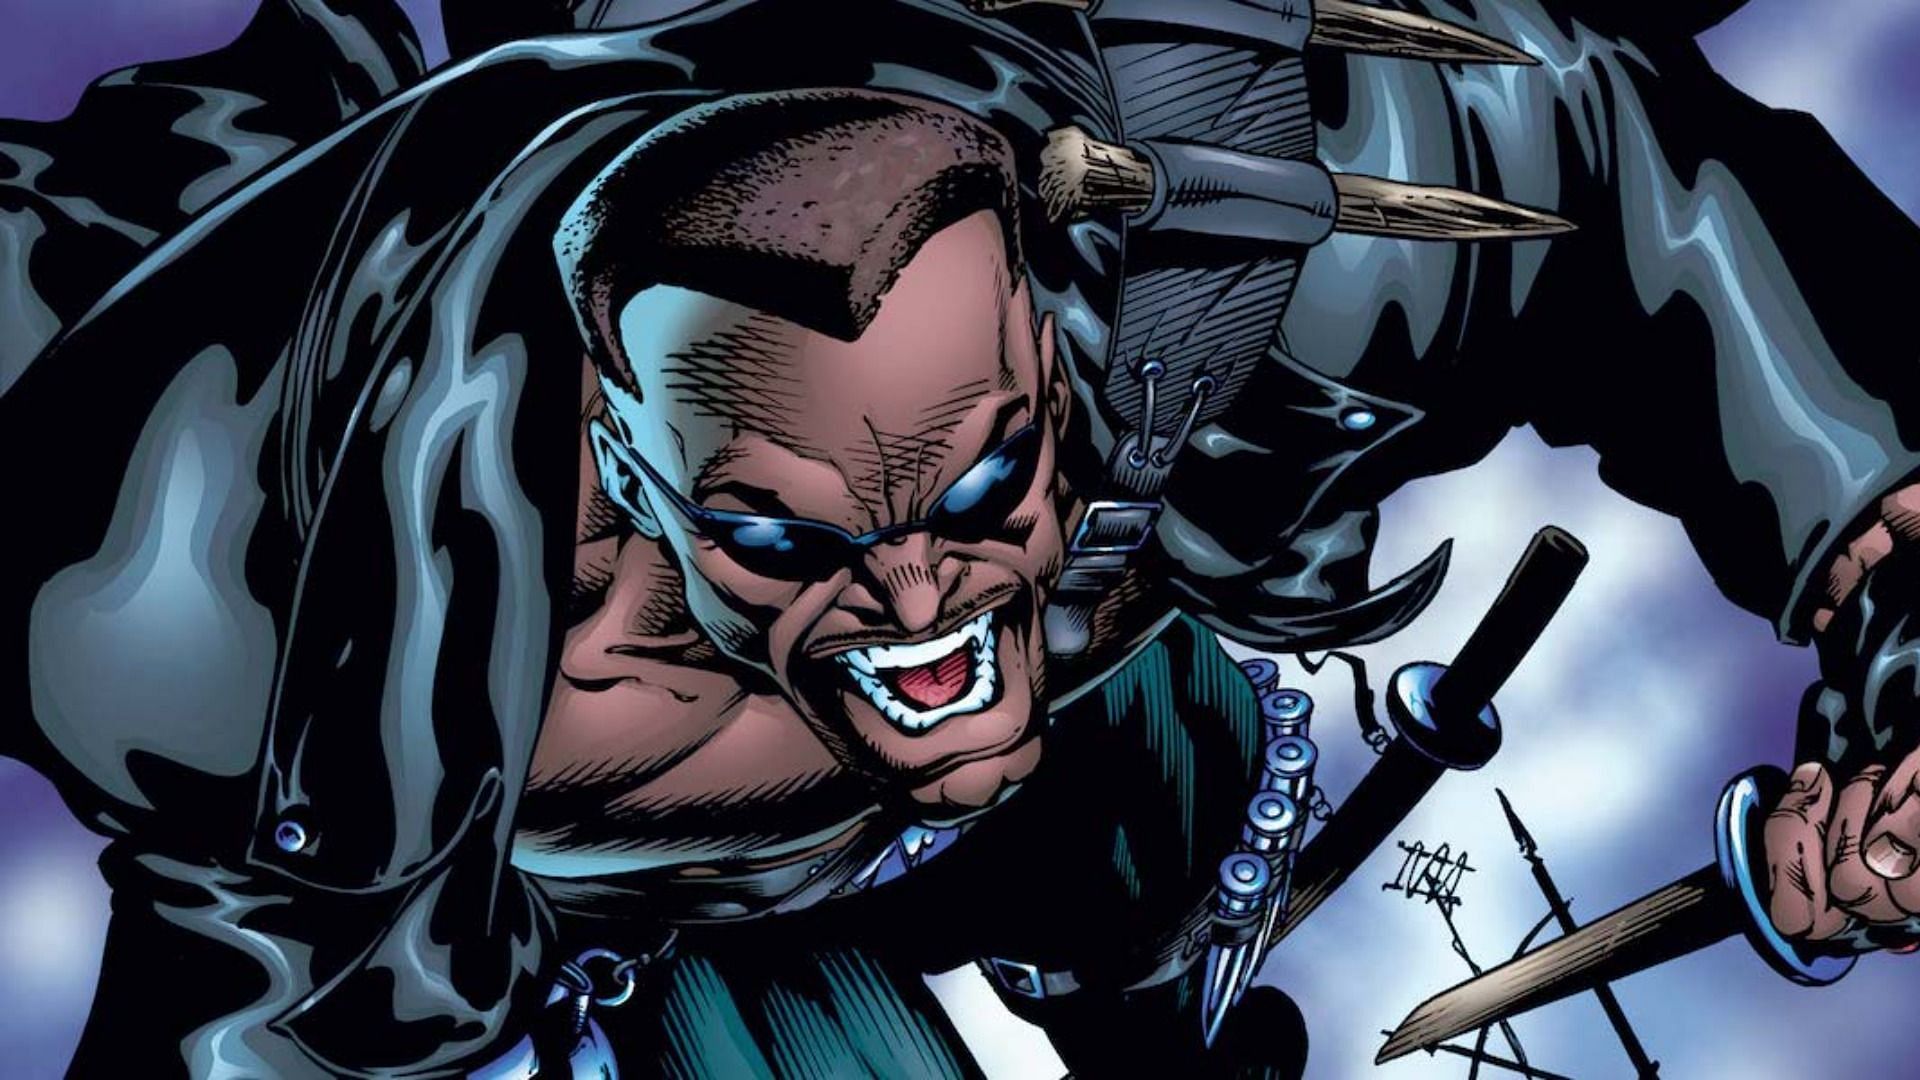 Blade is rumored to appear in Warewolf by Night before appearing in his solo film (Image via Marvel)